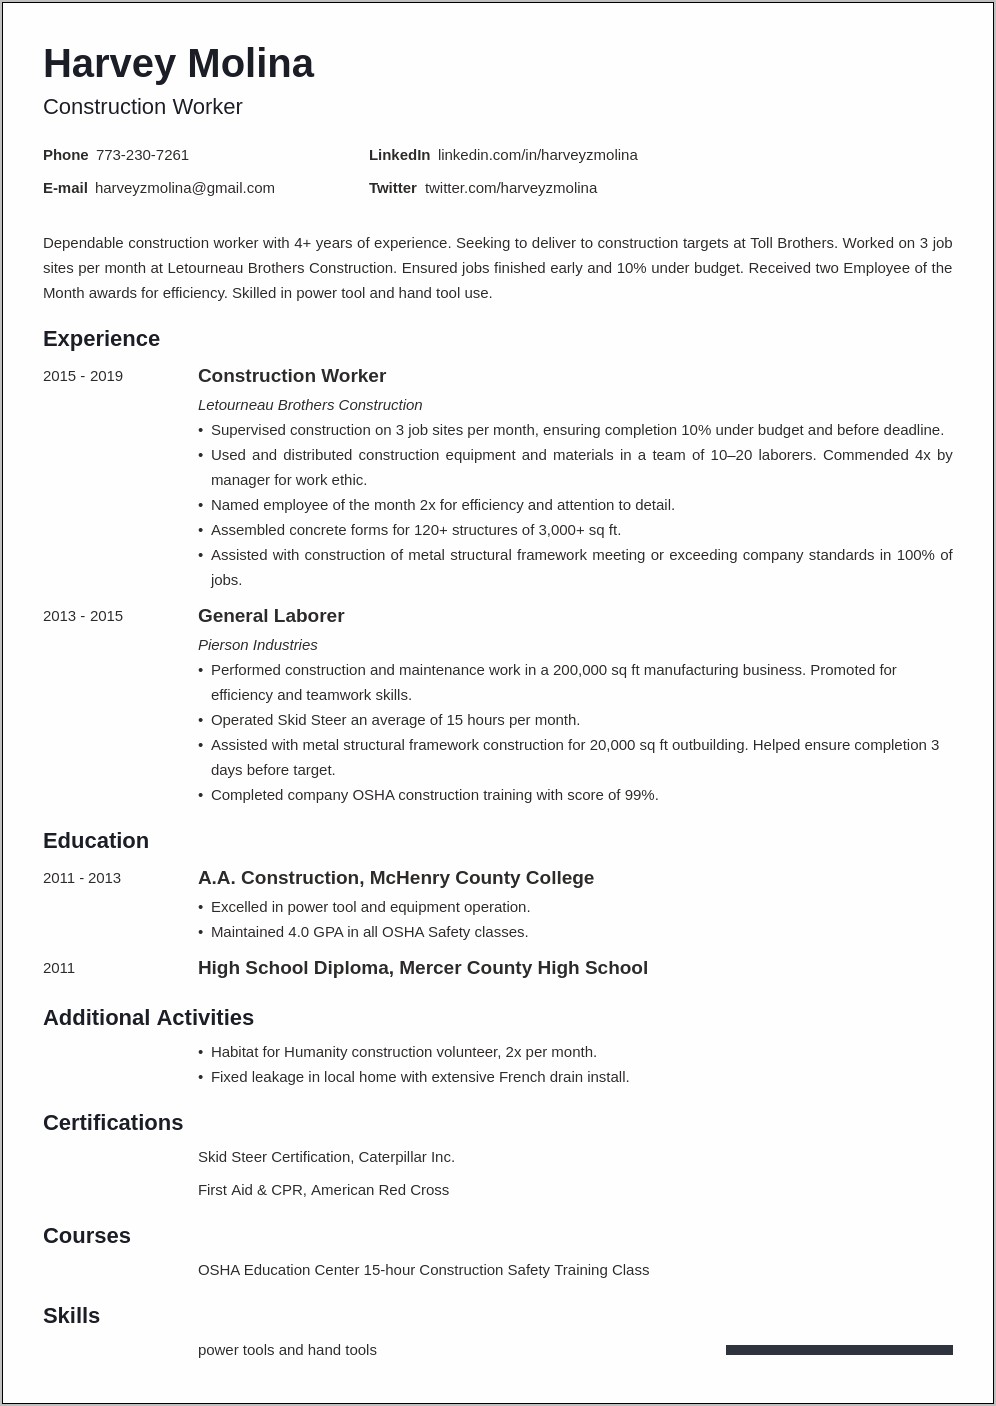 Resume Objective Ideas For Construction Field